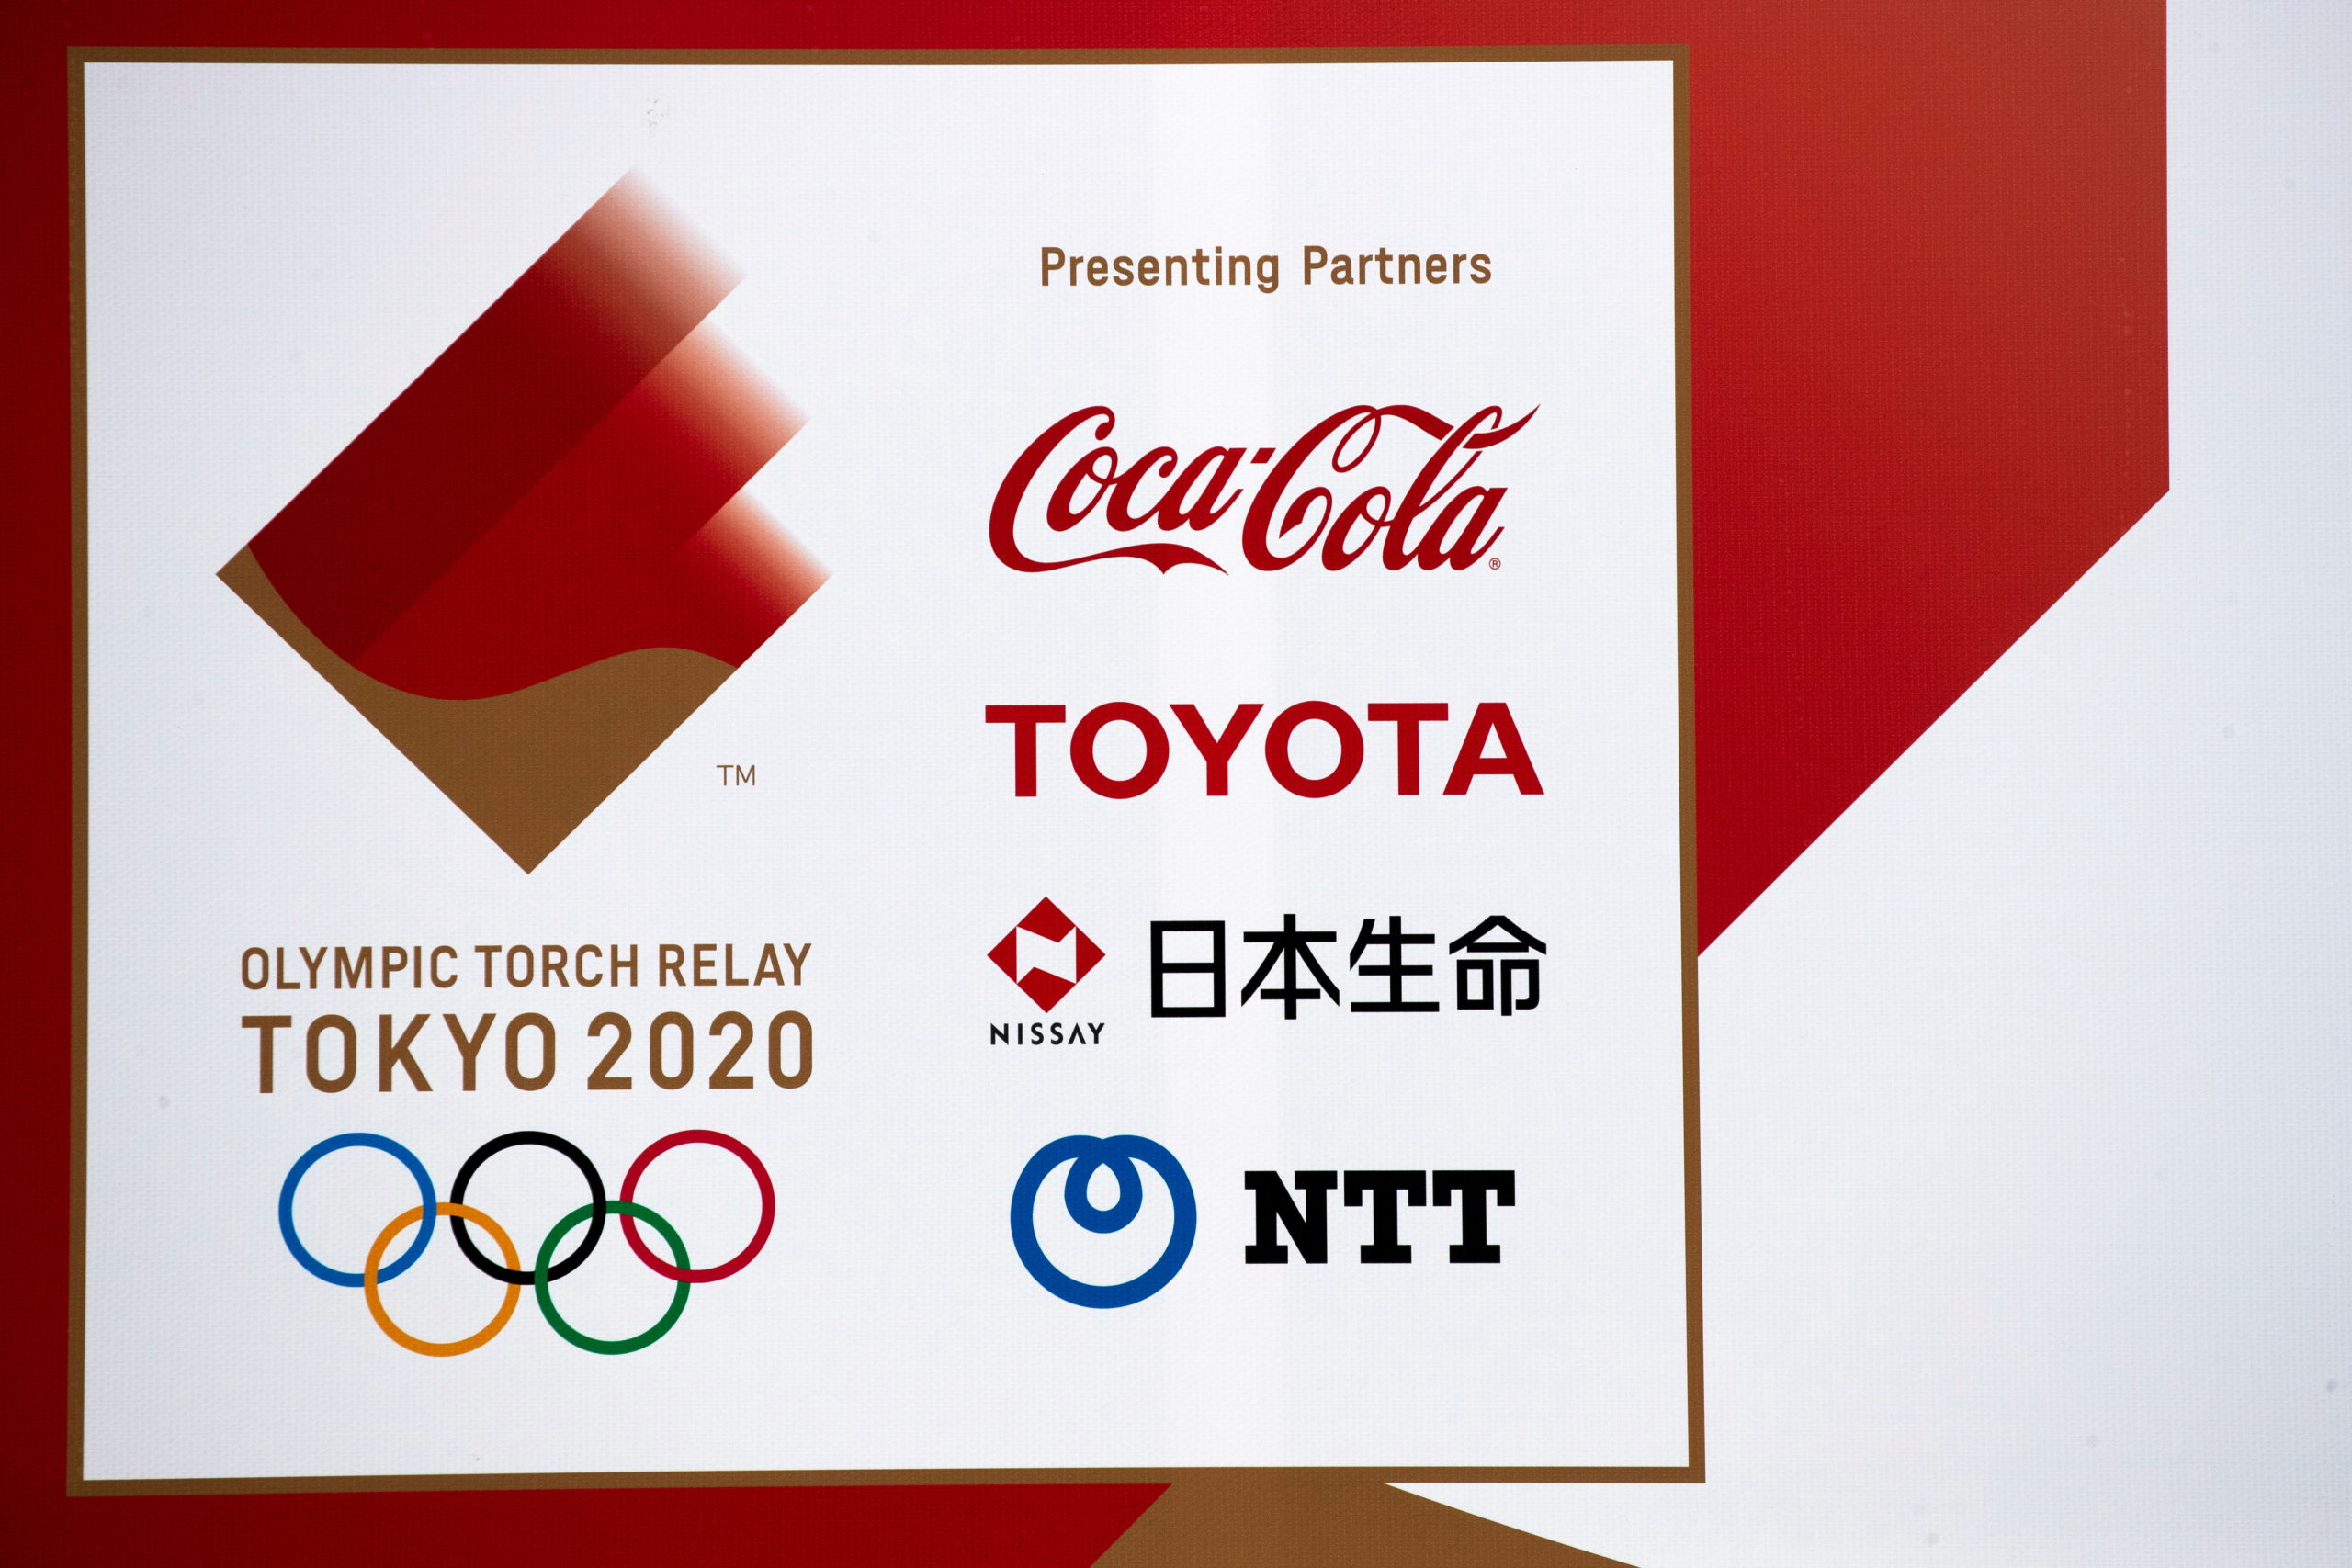 A banner advertising Coca-Cola beverages, Toyota, Nissay and NTT, Olympic Games partner for Tokyo 2020, in Fukushima prefecture, Japan March 8, 2020. Picture taken March 8, 2020. 